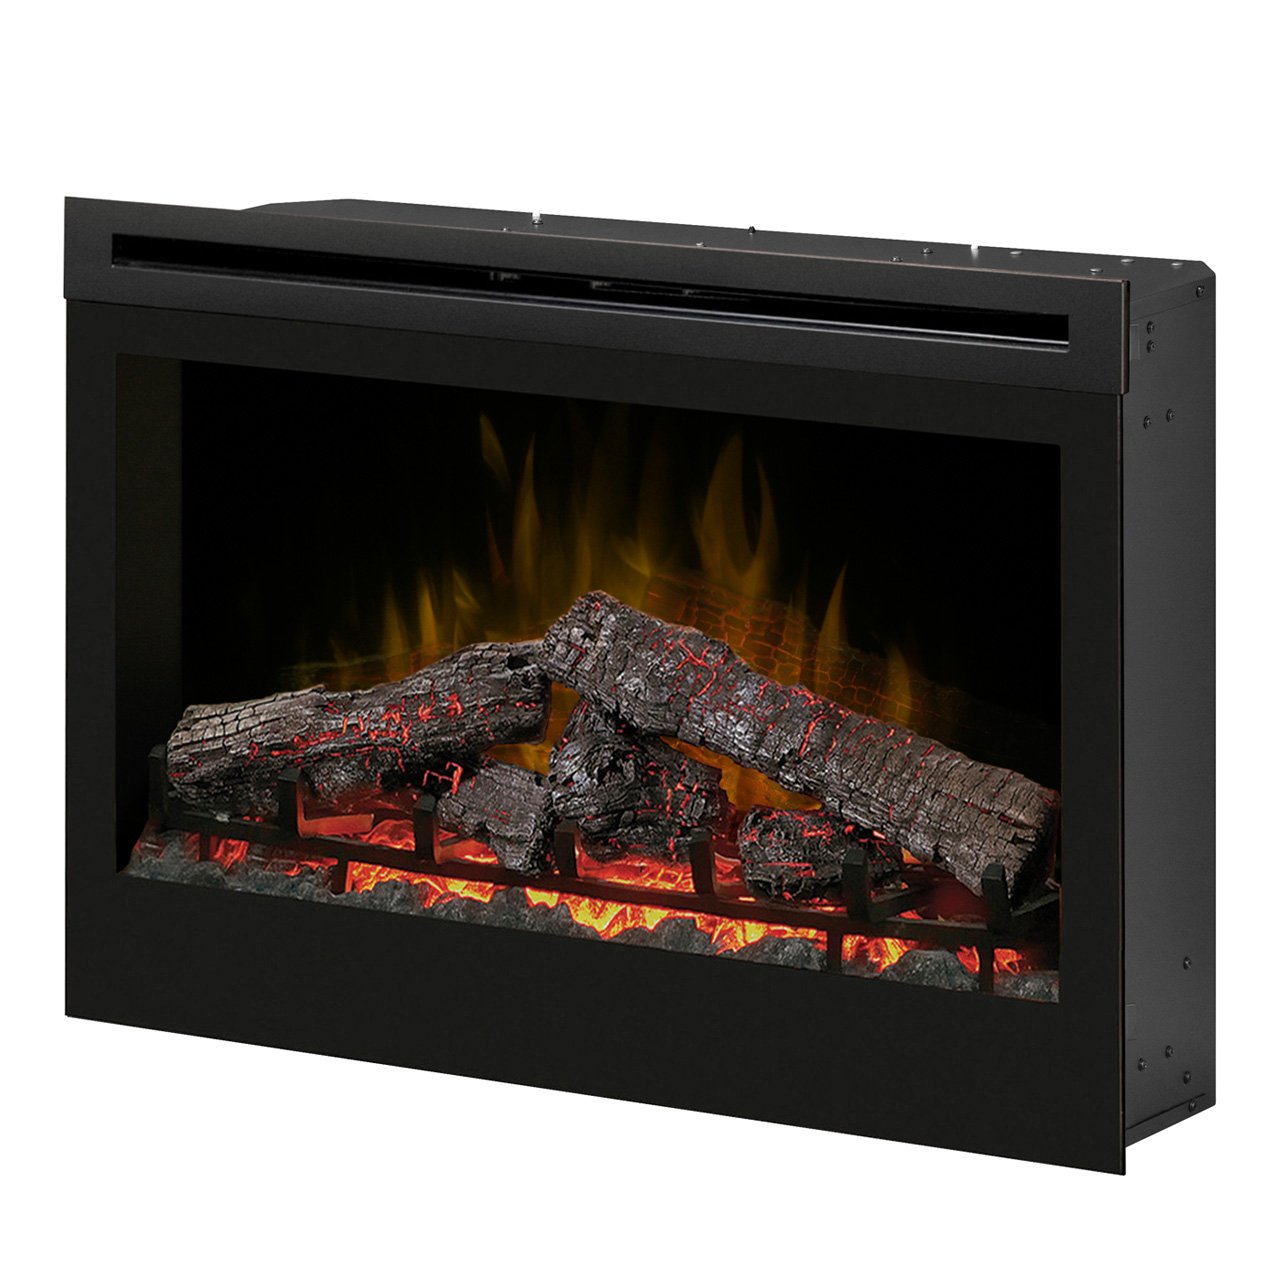 Fireplace for Your Home Best Of Dimplex Df3033st 33 Inch Self Trimming Electric Fireplace Insert